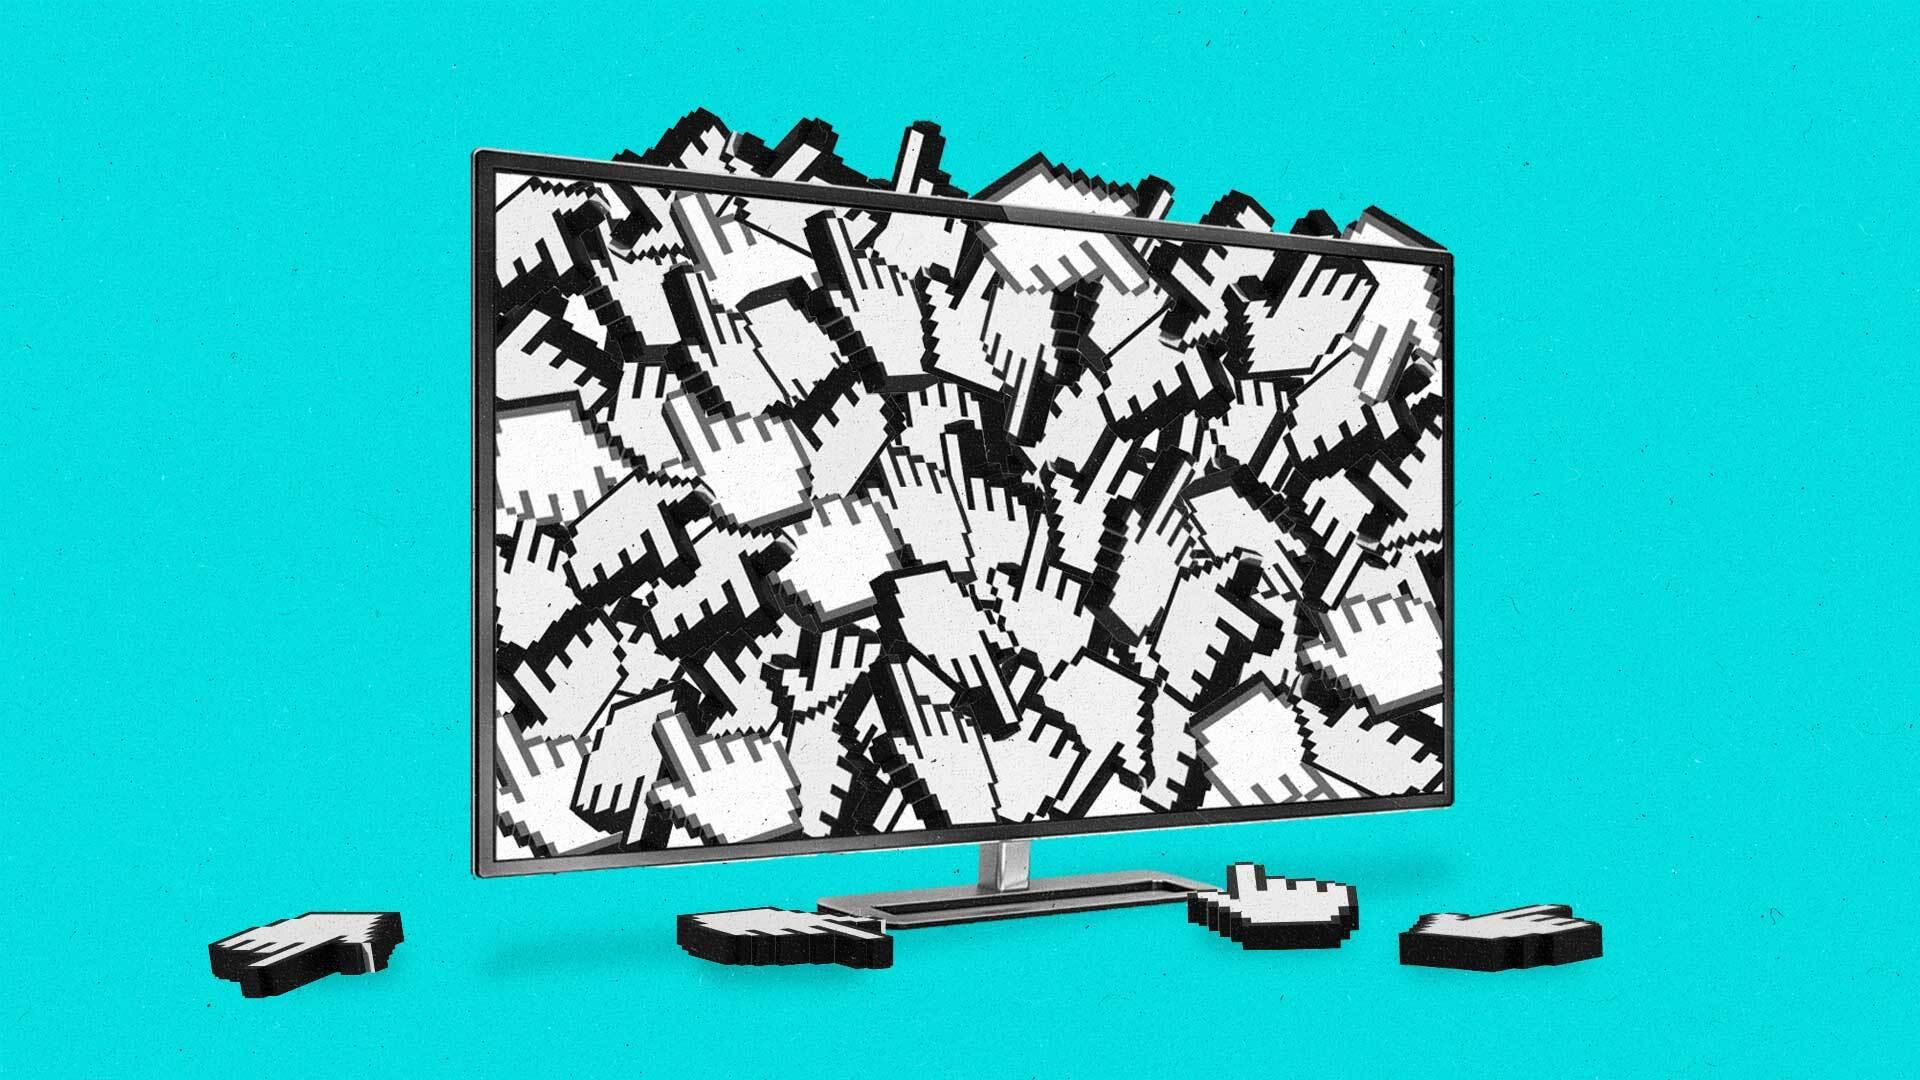 A connected TV is brimming with finger cursors, with some laying on the floor.